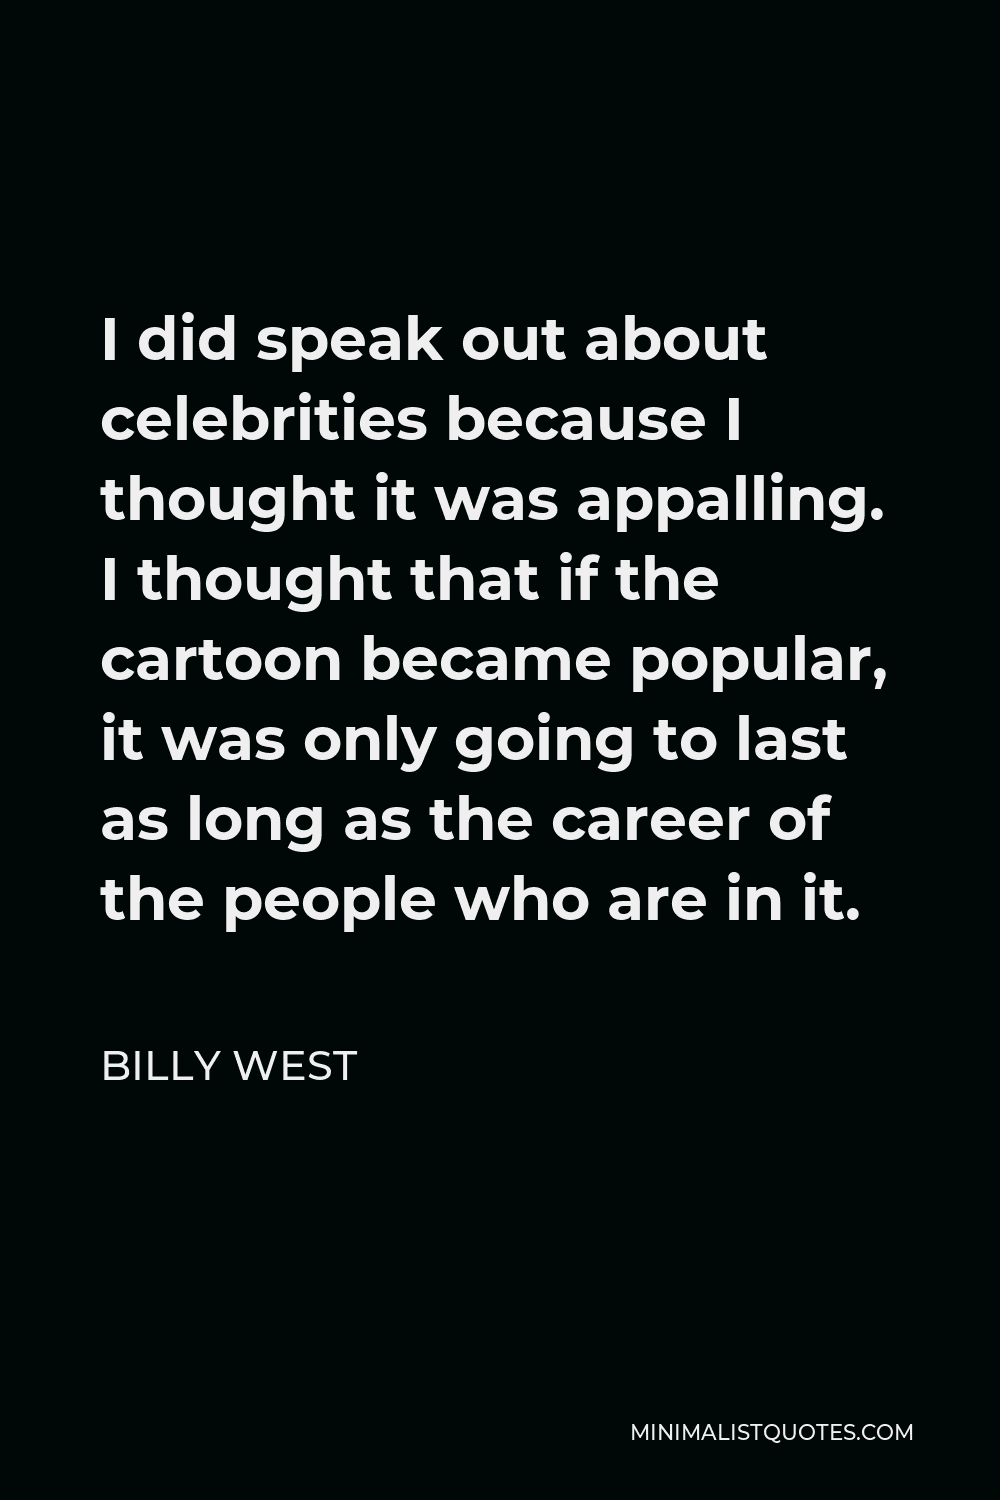 Billy West Quote - I did speak out about celebrities because I thought it was appalling. I thought that if the cartoon became popular, it was only going to last as long as the career of the people who are in it.